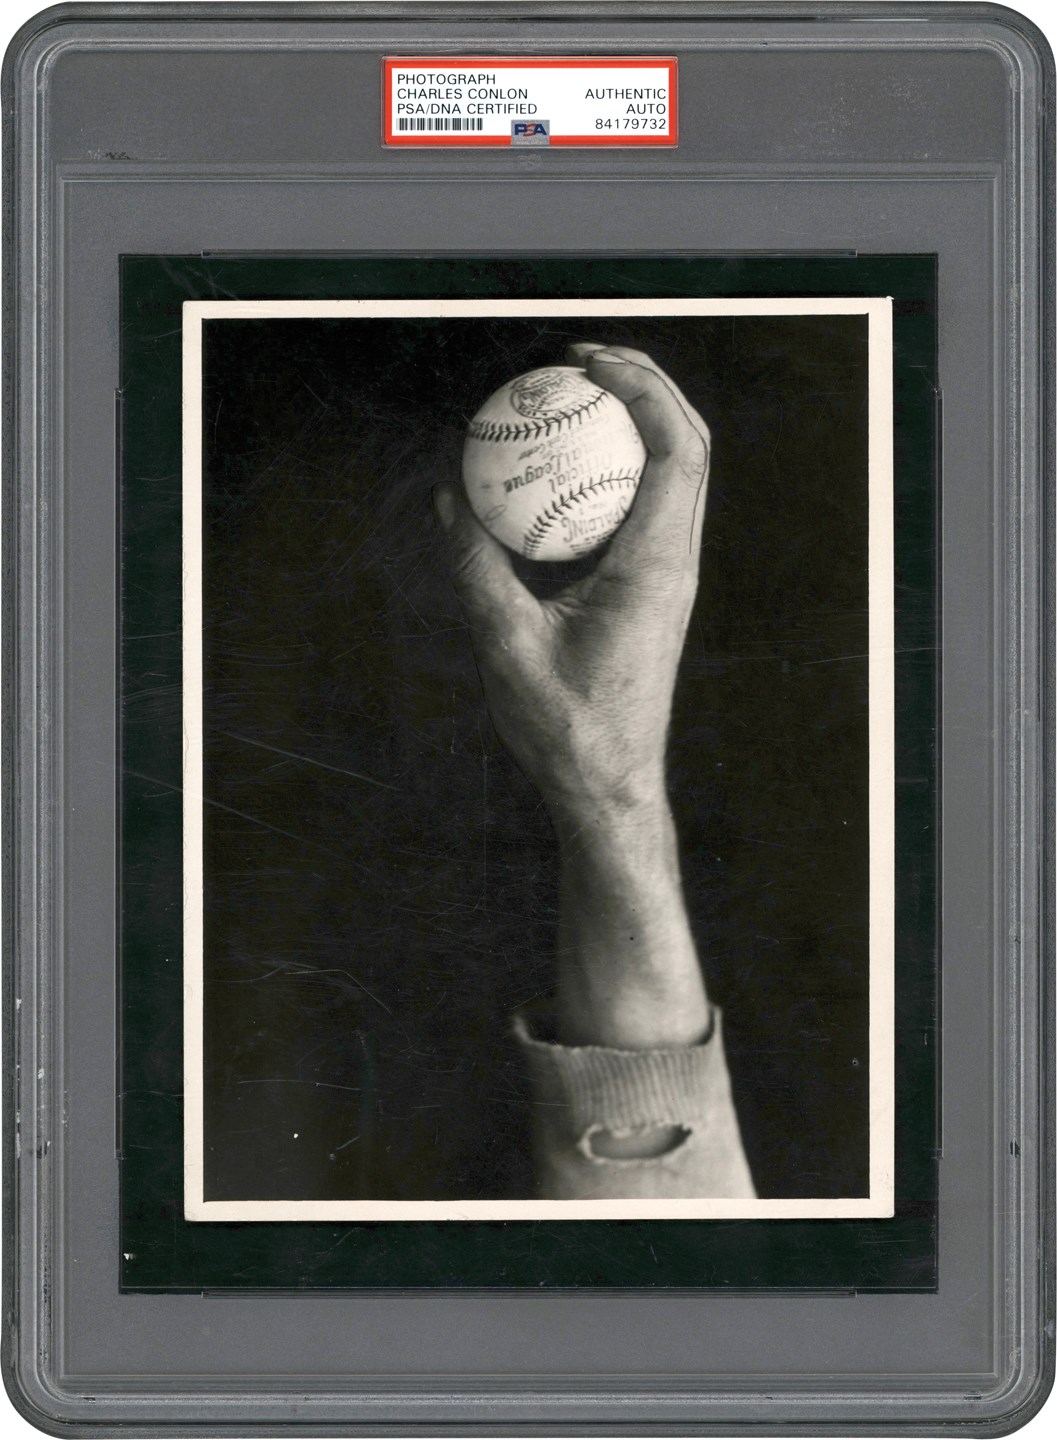 Vintage Sports Photographs - 1920s Guy Bush "Fastball Grip" Type I Photograph by Charles Conlon - Signed by Conlon on Reverse (PSA)